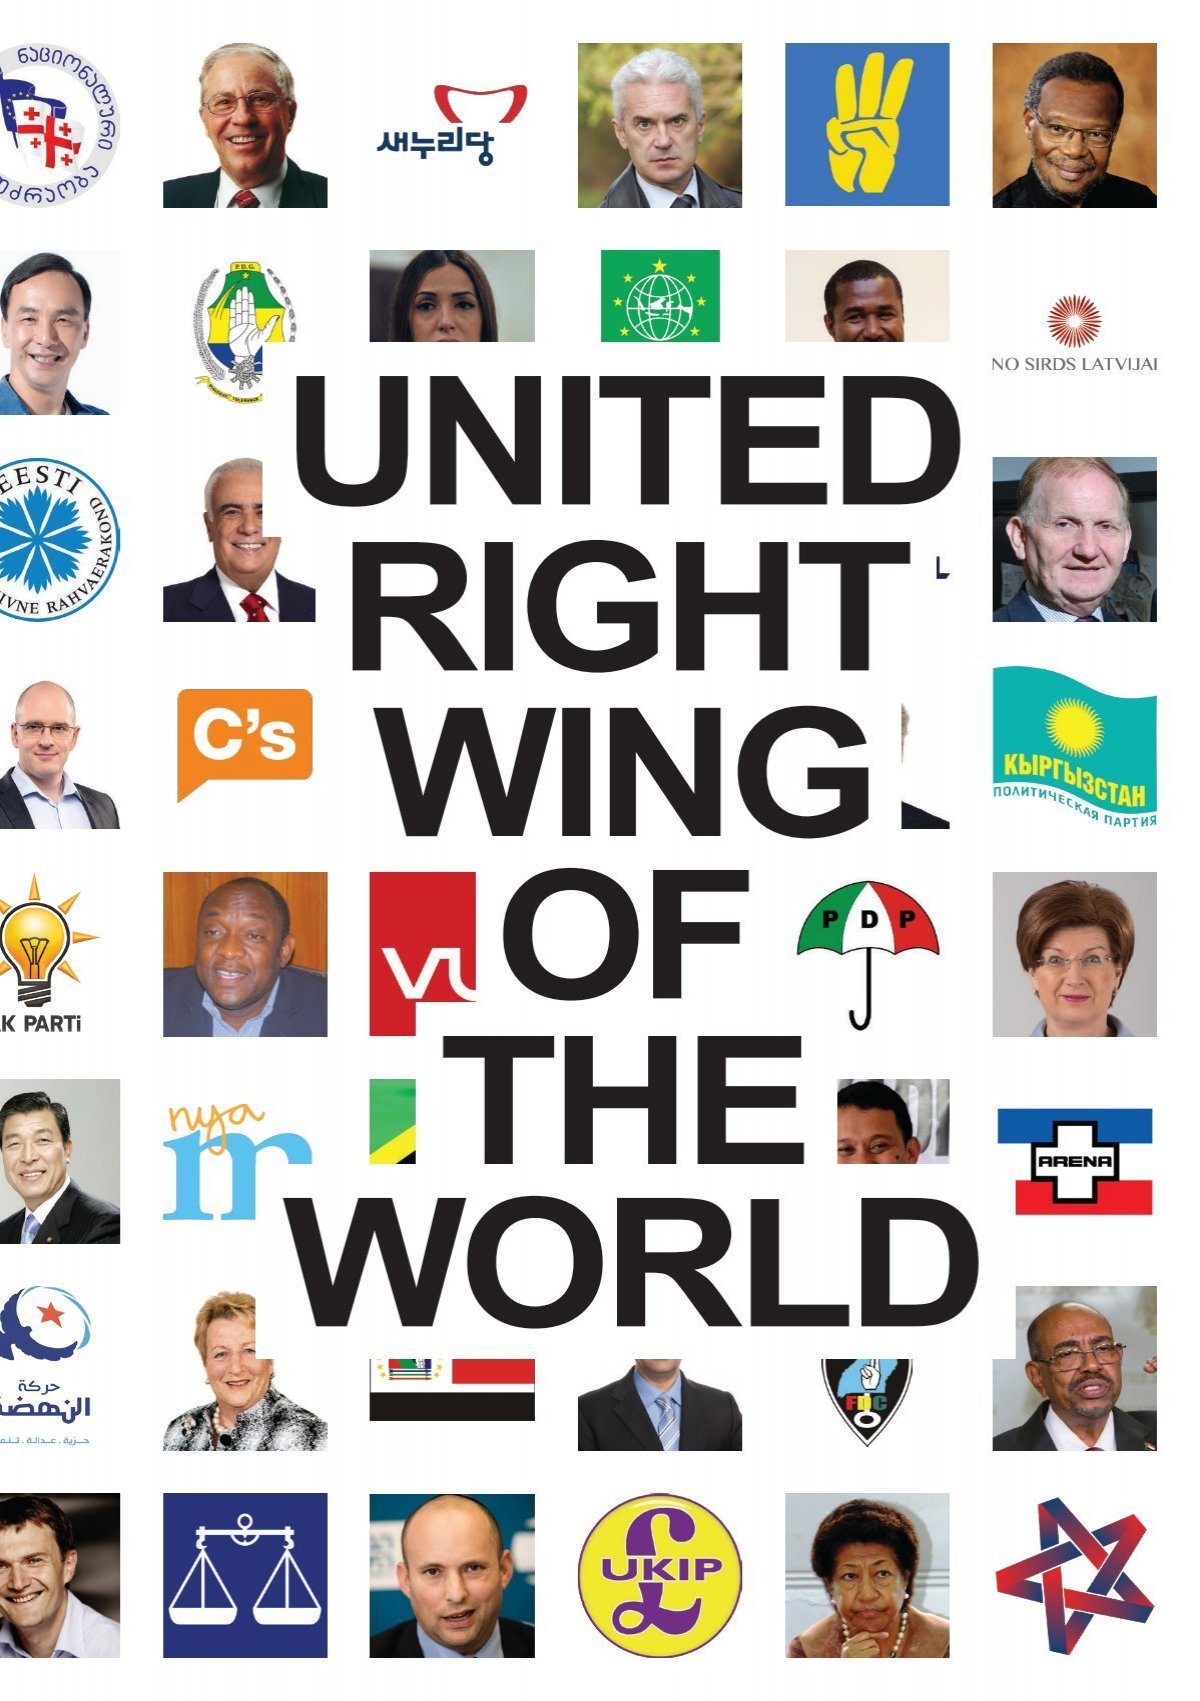 United Right Wing Of The World